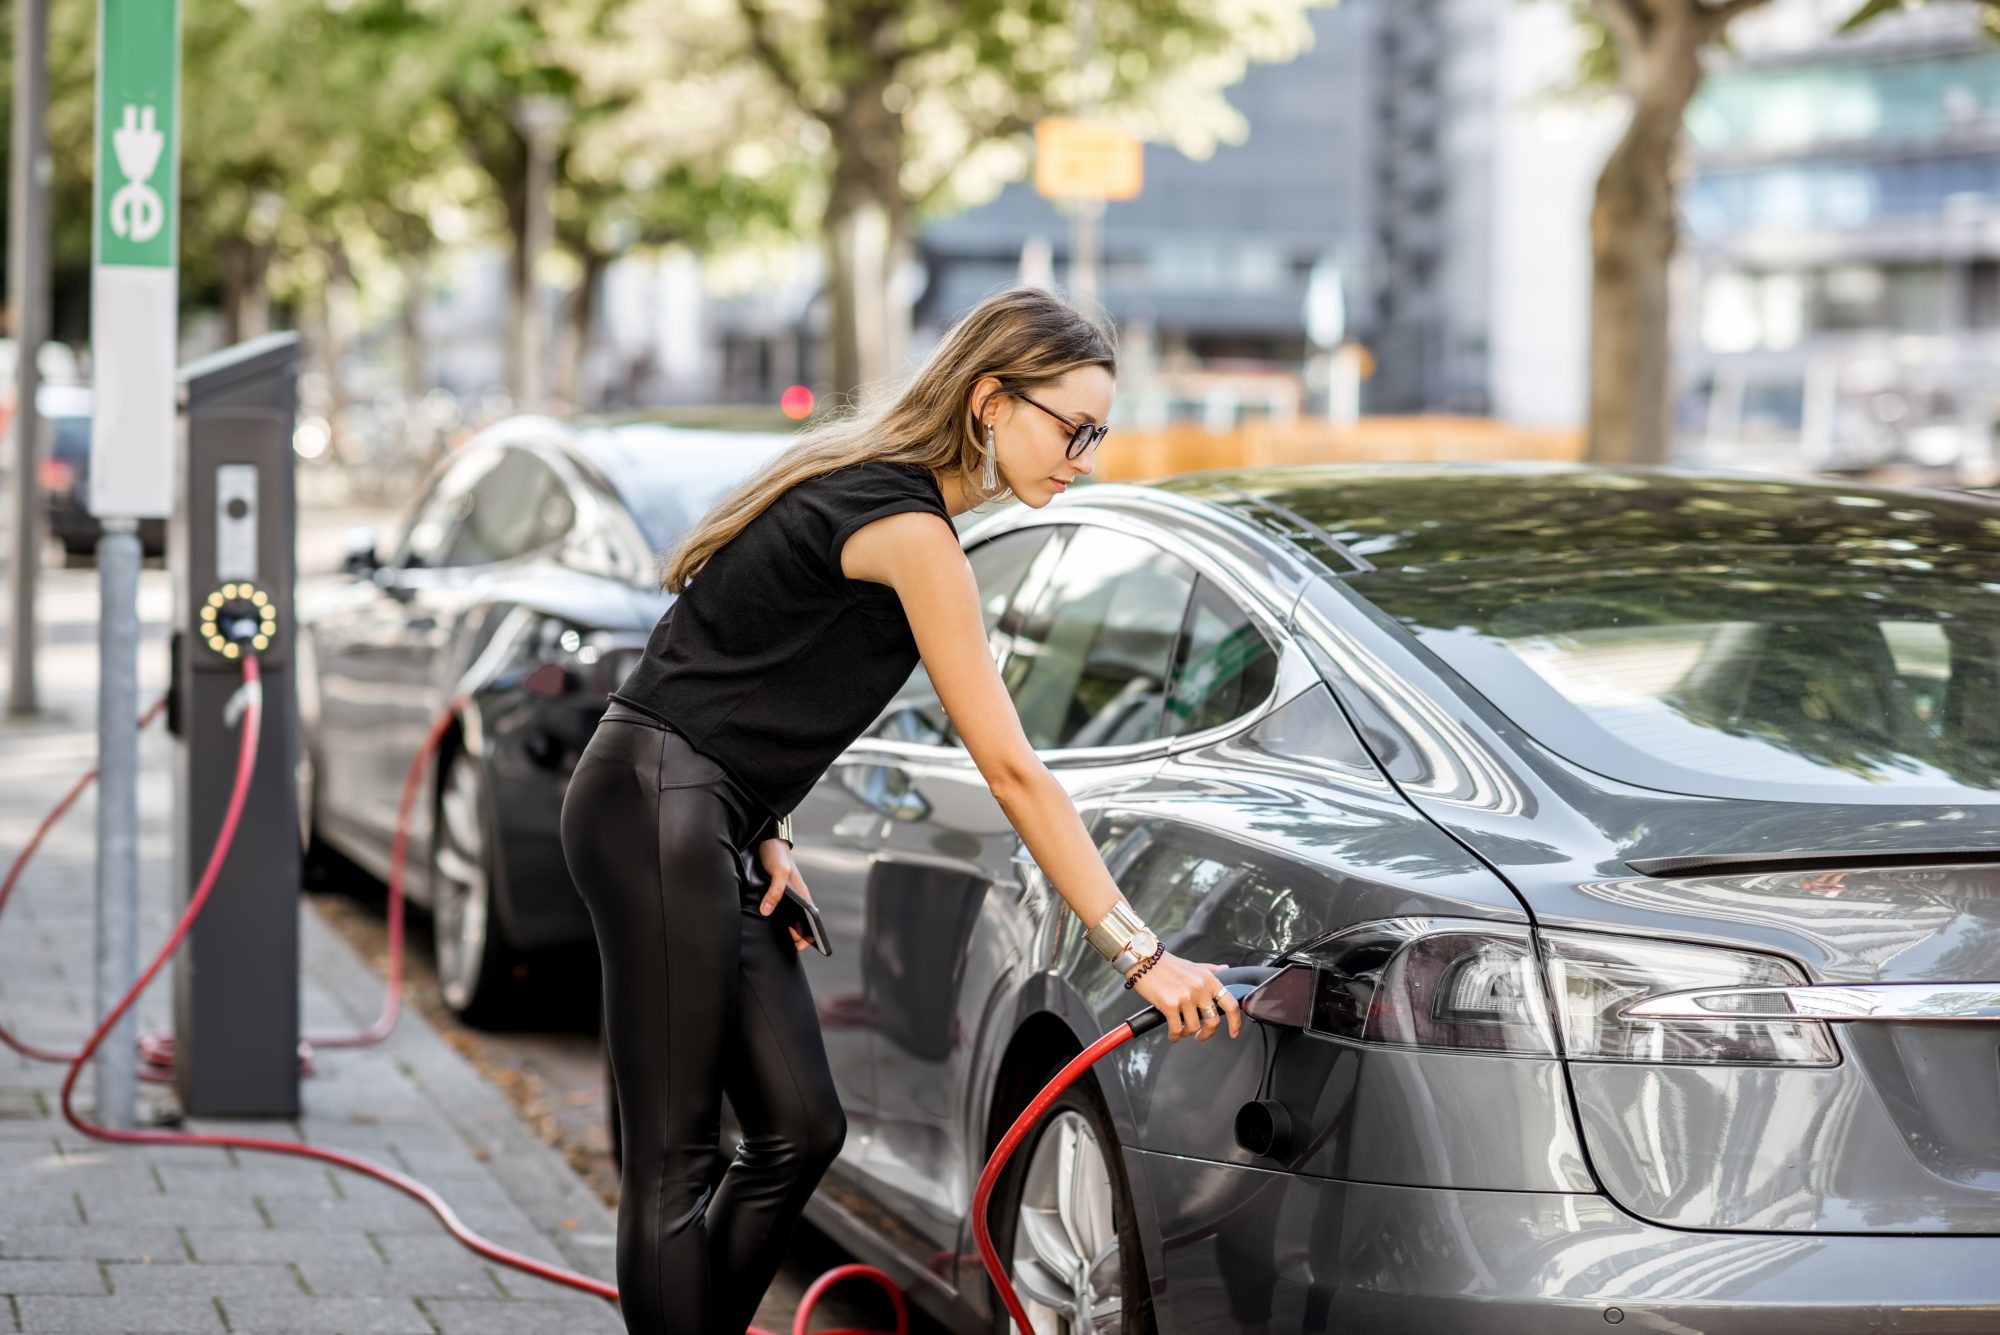 Caucasian woman dressed in black charges up her electric vehicle 